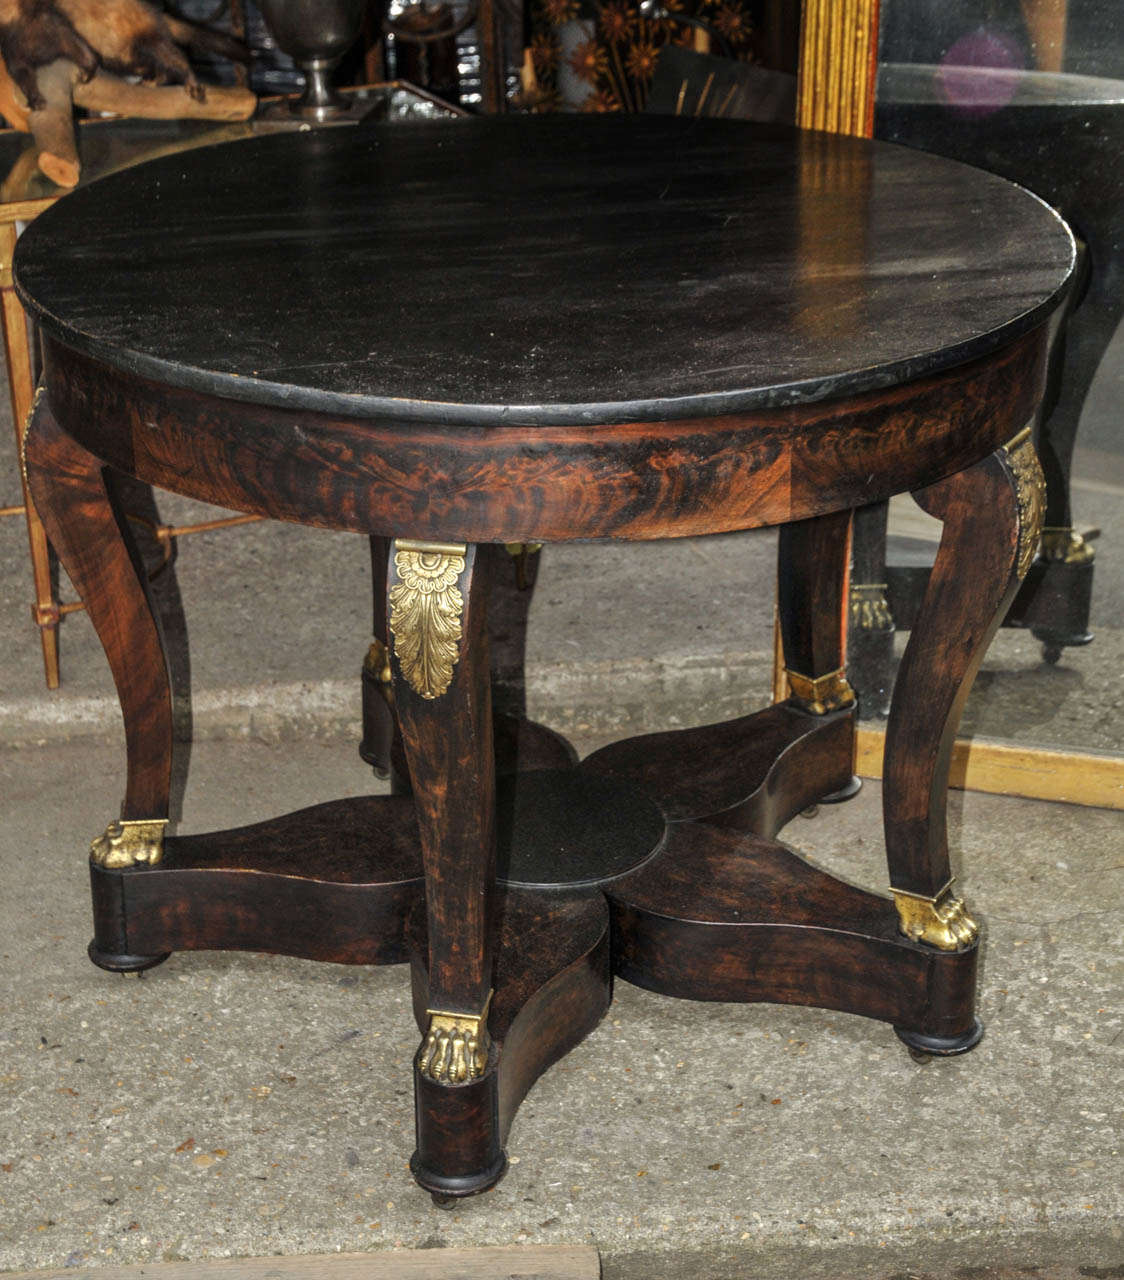 1815 mahogany gueridon. Ebonized wood top. Empire period. Good condition. Normal wear consistent with age and use.